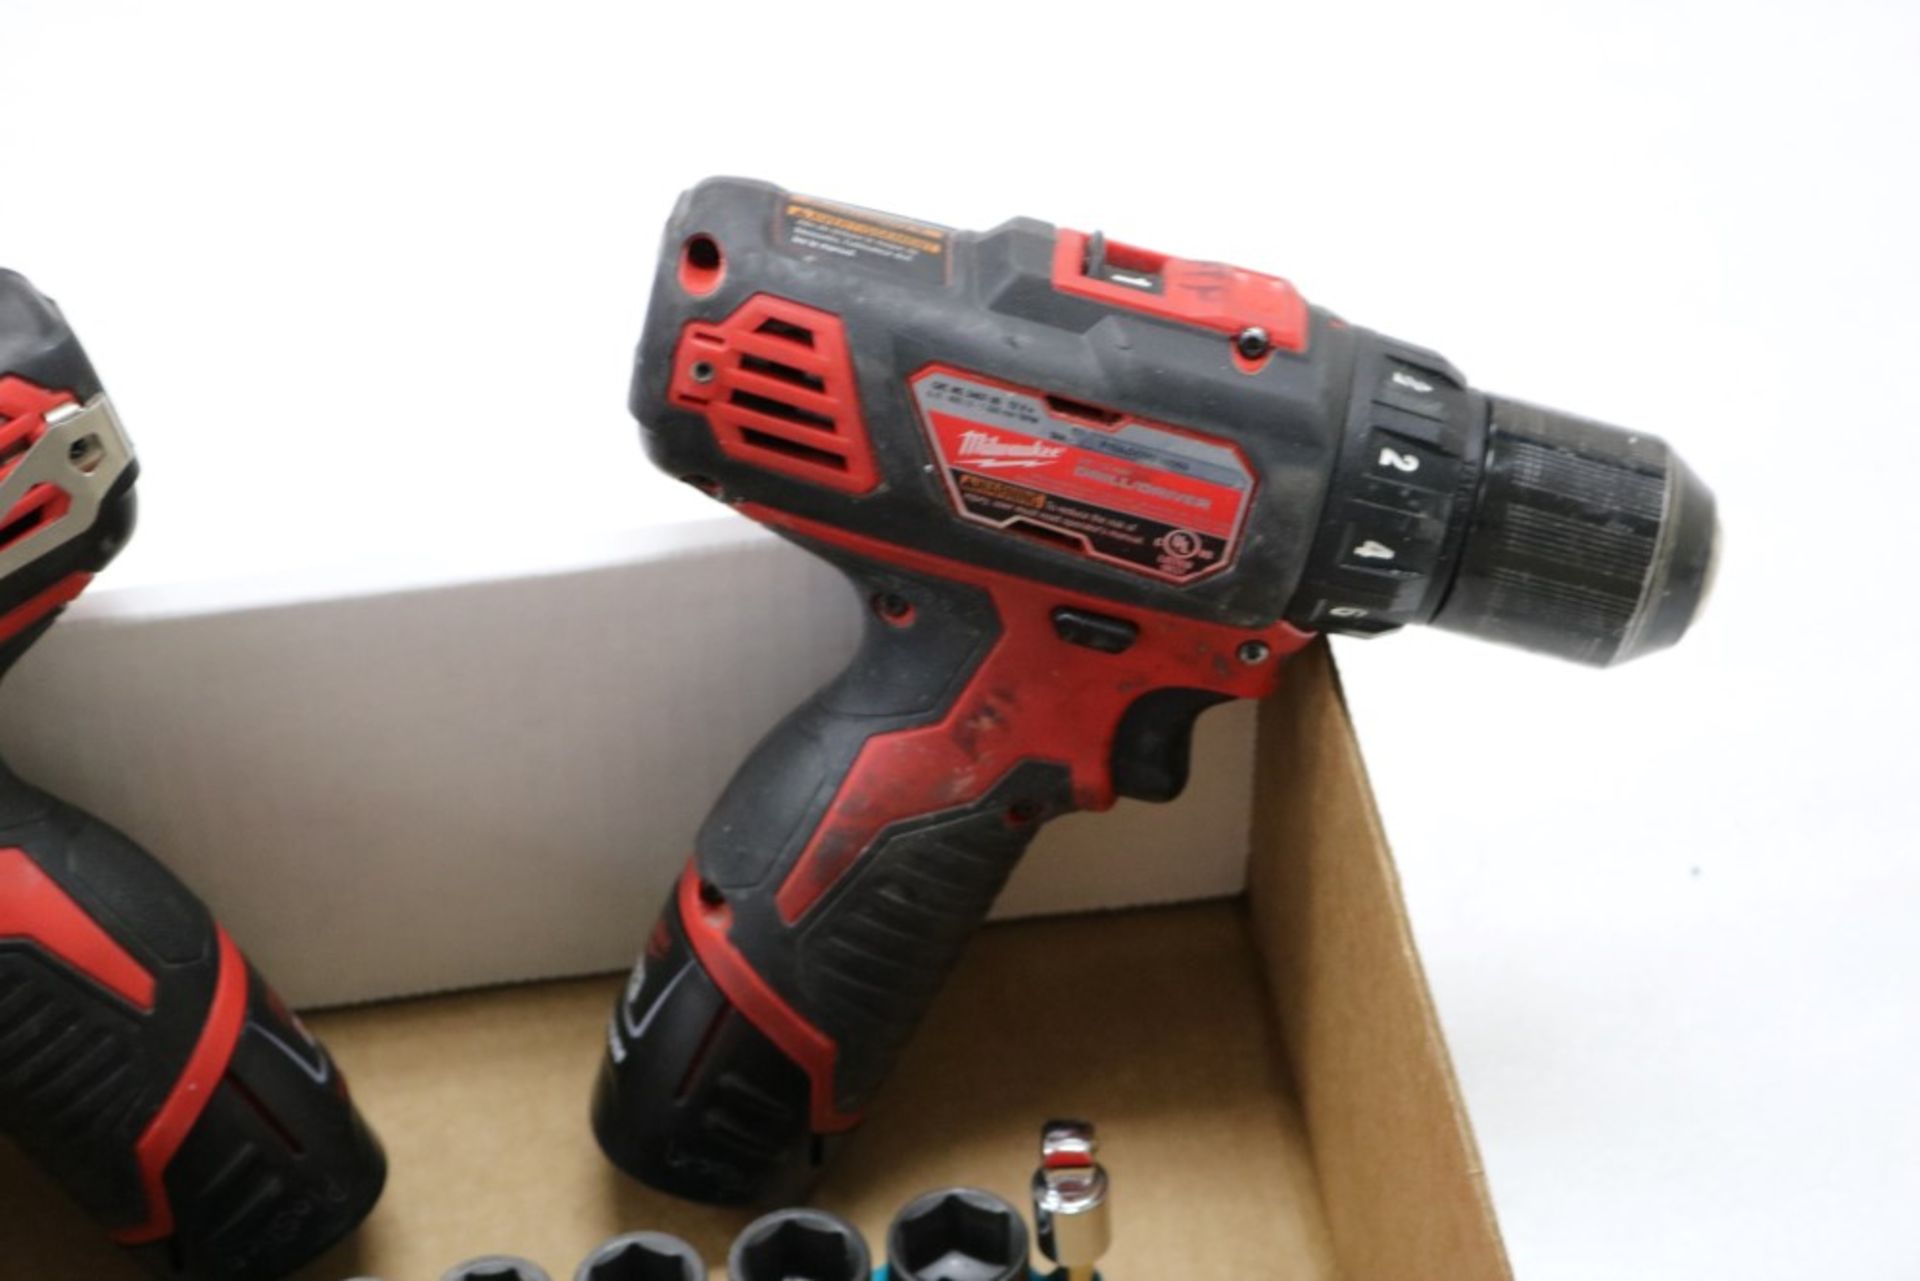 Milwaukee 1/4" Hex Impact Driver Cordless, Milwaukee 3/8" Drill Driver Cordless, Charging Station - Image 3 of 5